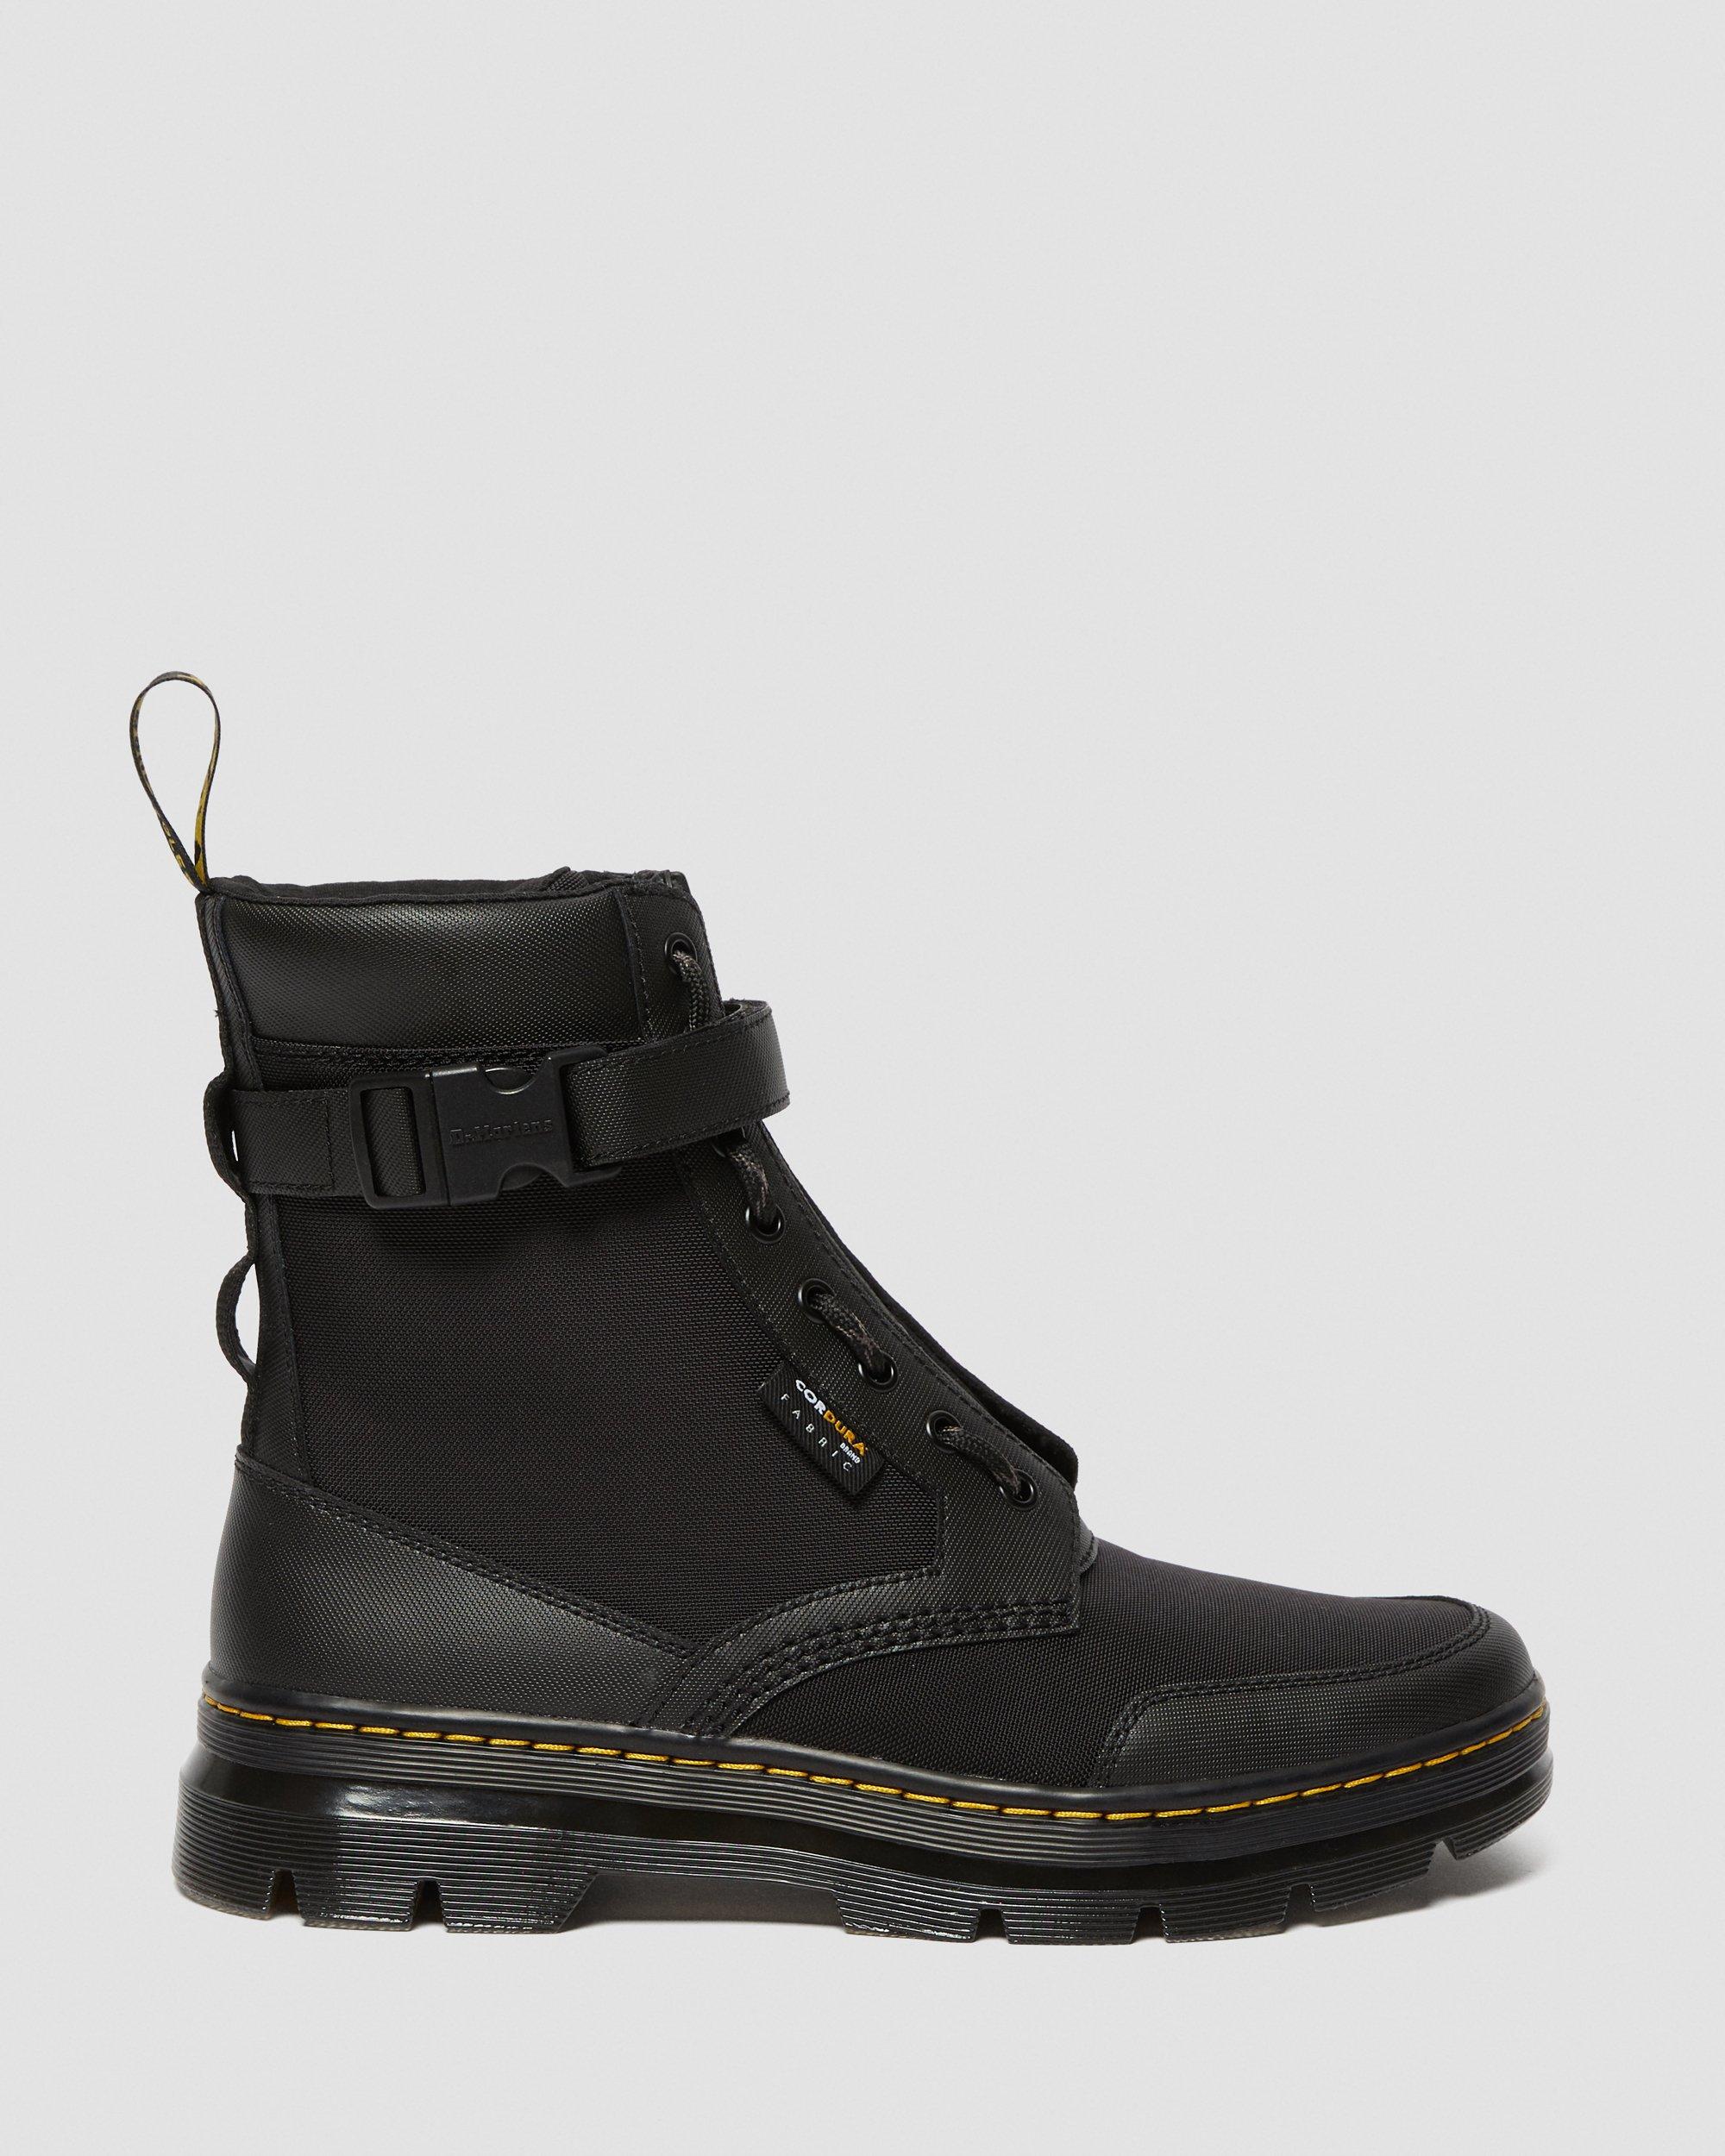 Combs Tech Jungle Casual Boots in Black